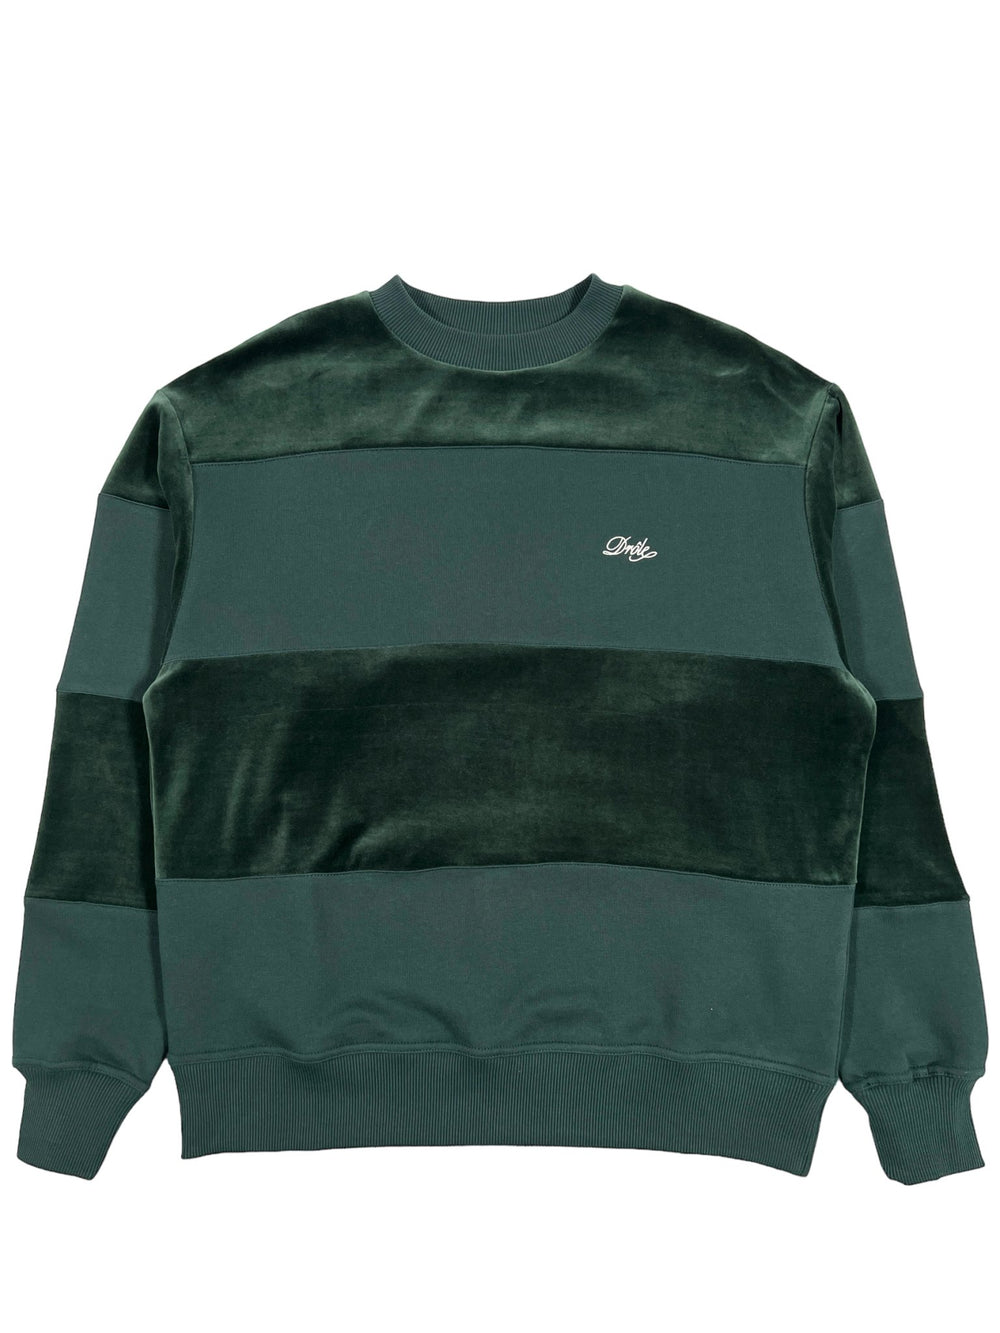 A Drole de Monsieur sweatshirt with a striped black and green design.